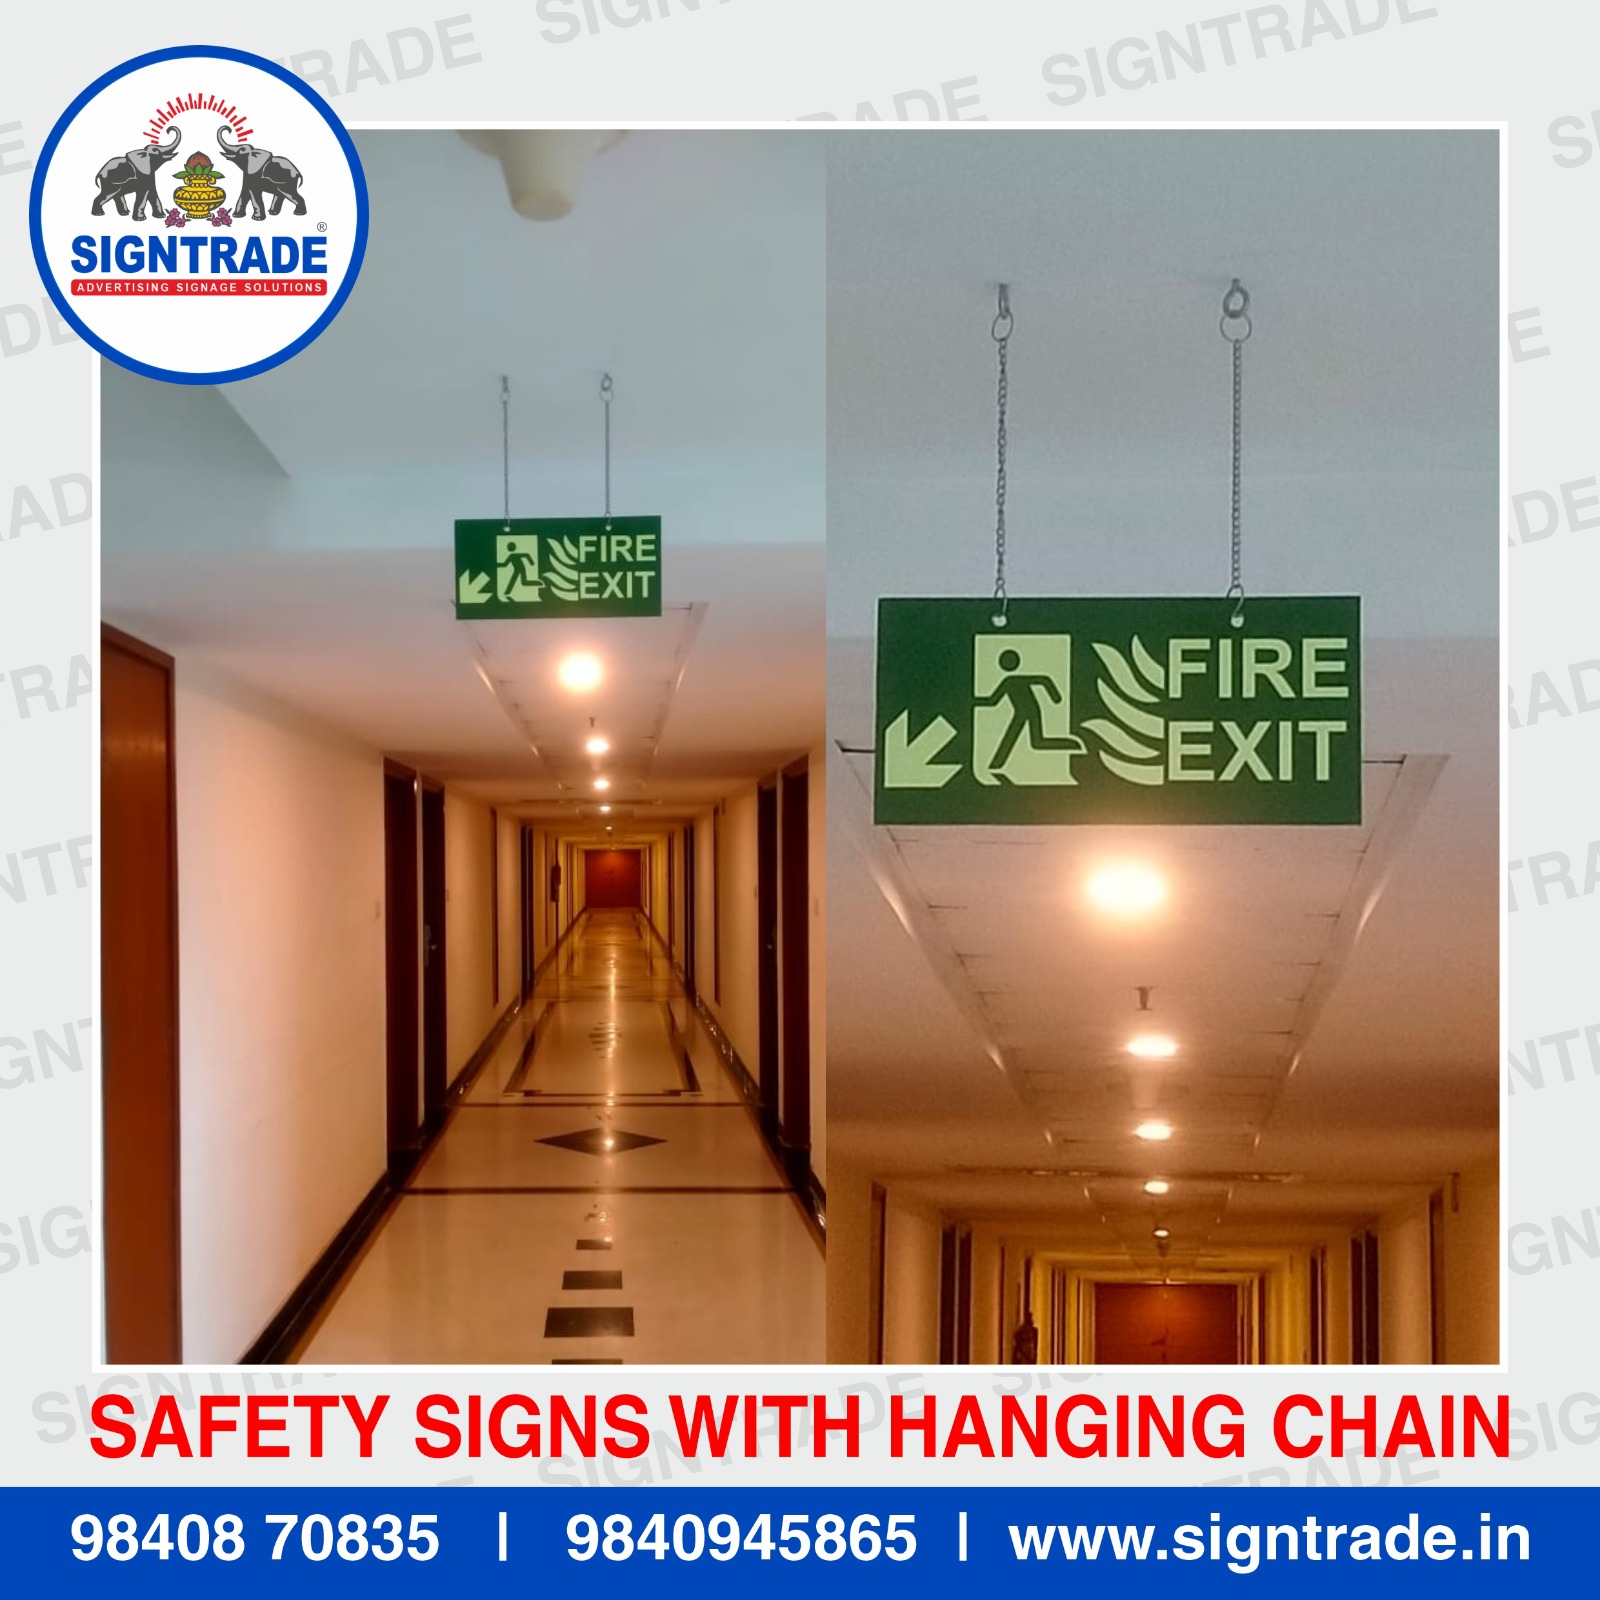 Safety Signs with Handing Chain in Chennai